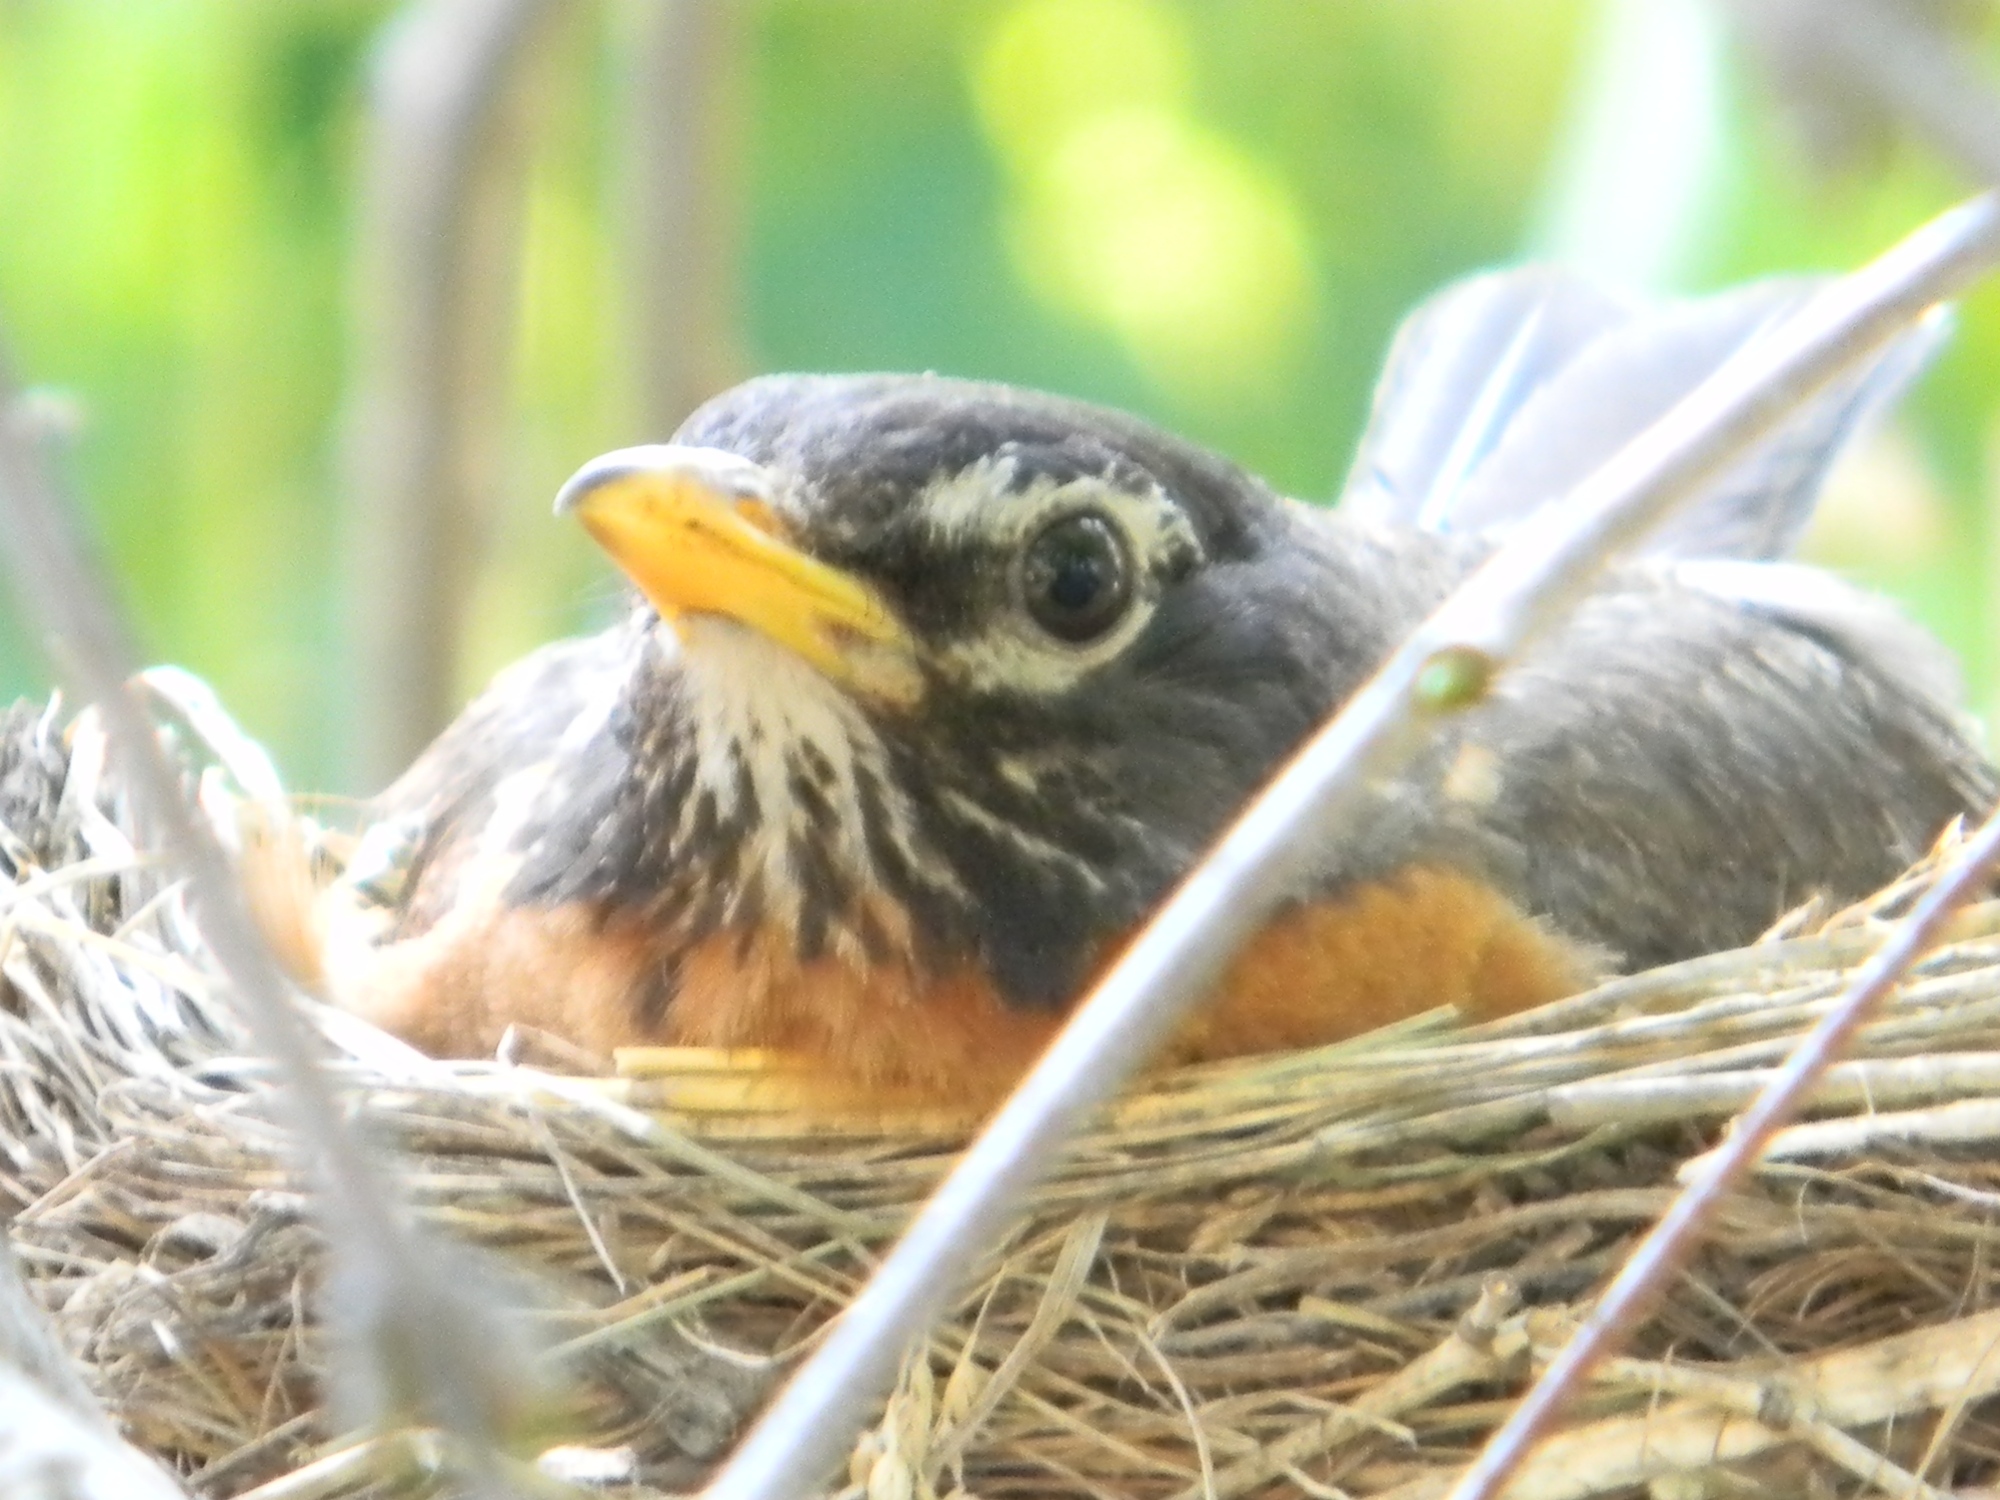 American Robin in the nest